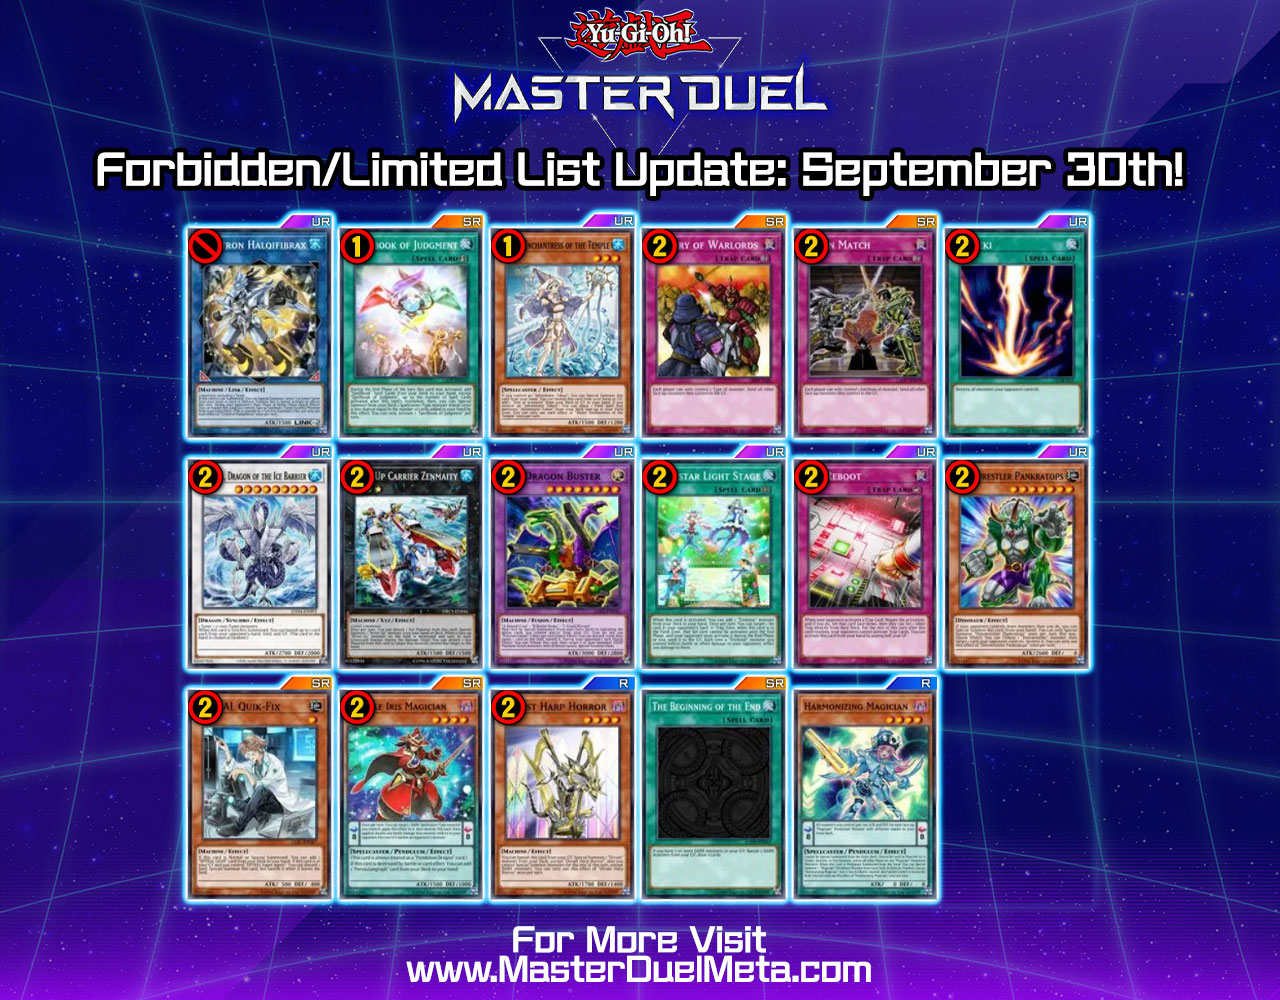 YuGiOh! Master Duel Guide on Twitter "A new Forbidden & Limited List